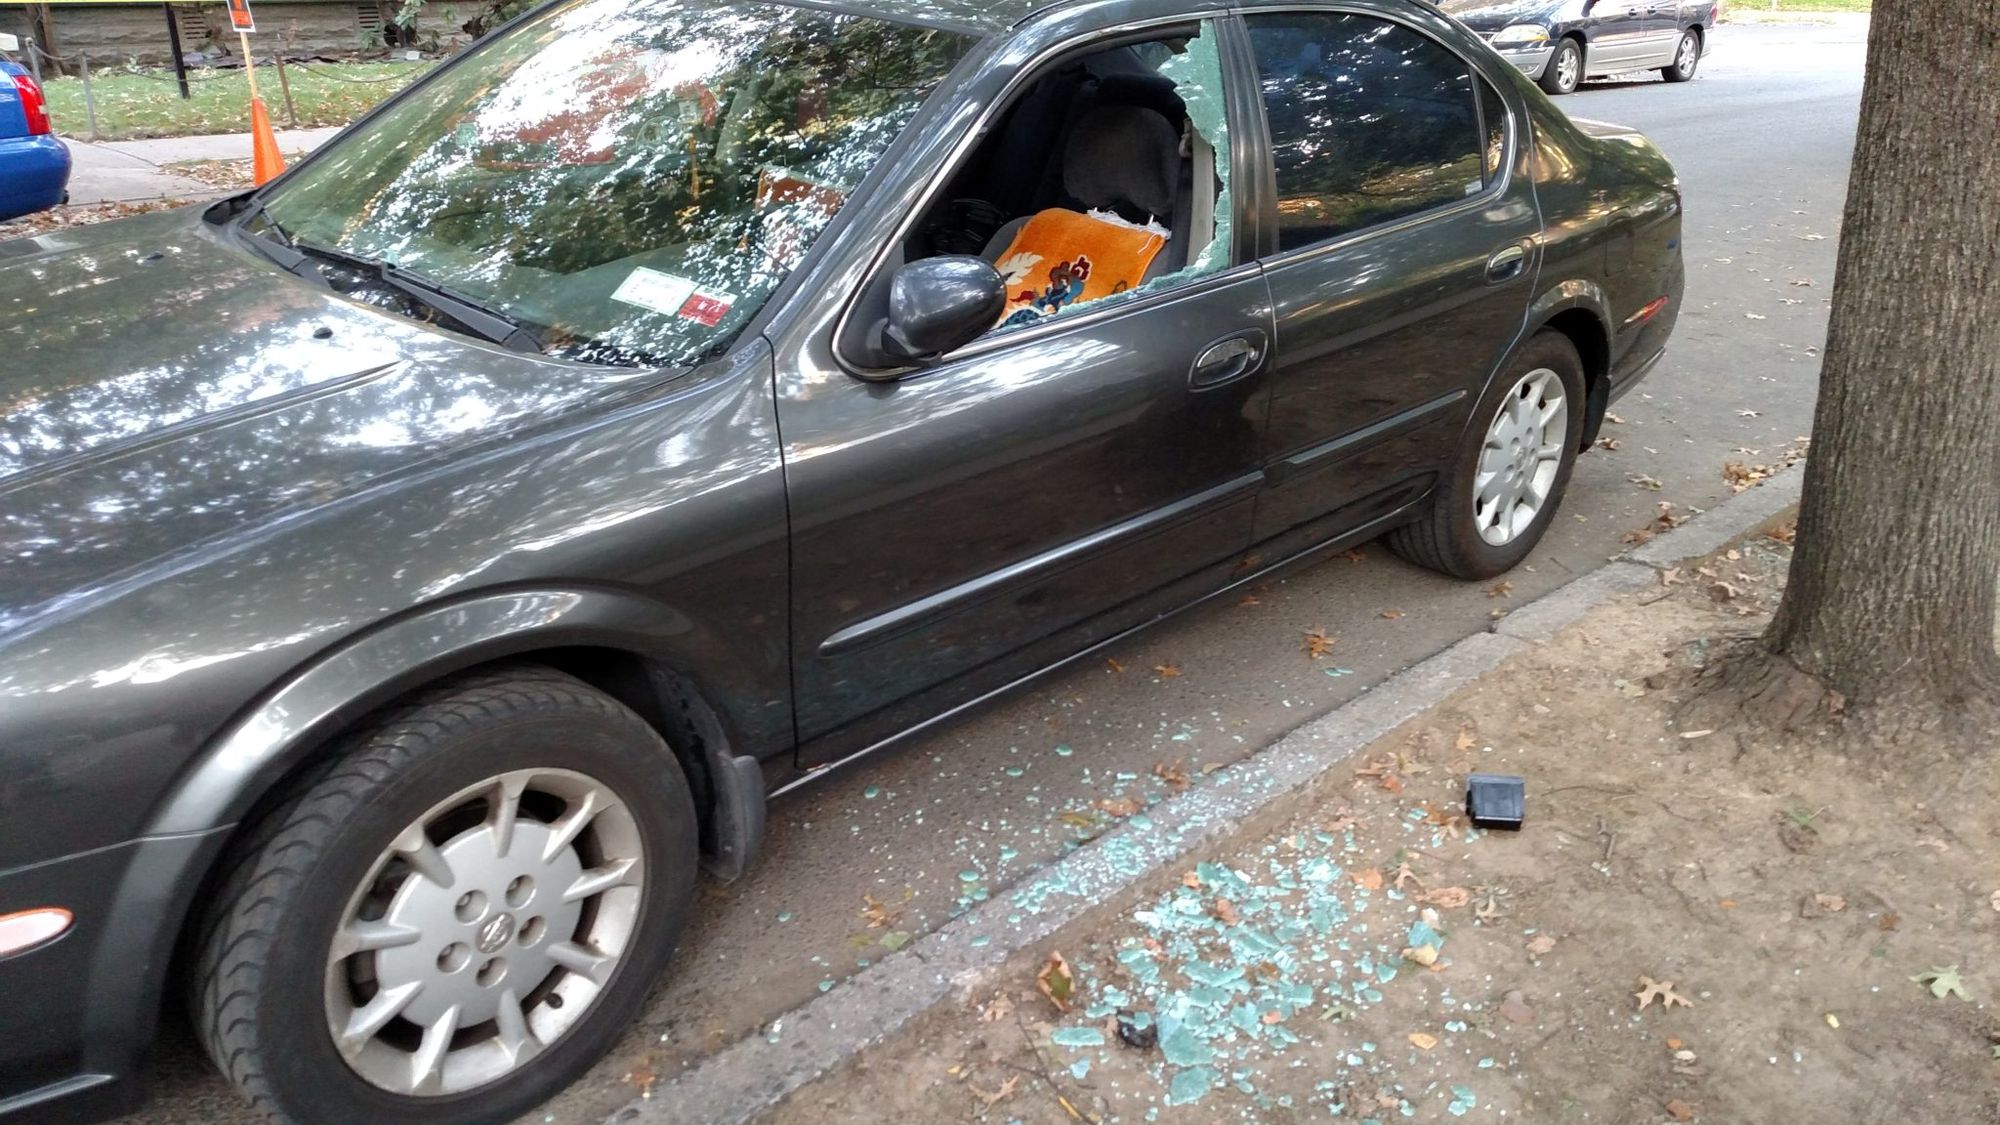 More Car Windows Smashed This Weekend